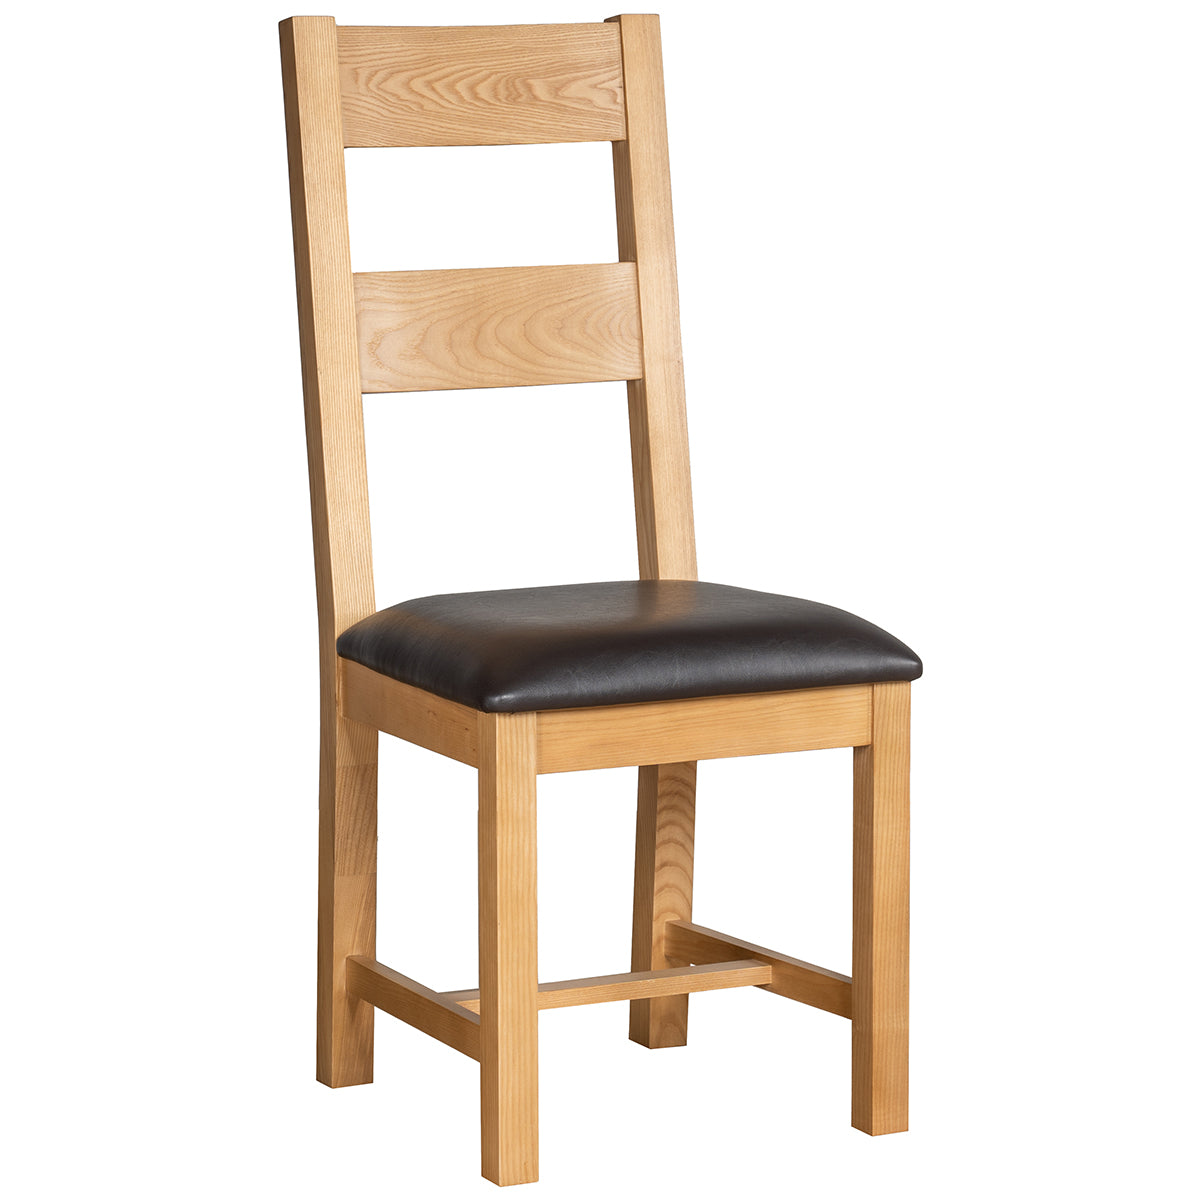 a wooden chair sitting in front of a wooden chair 